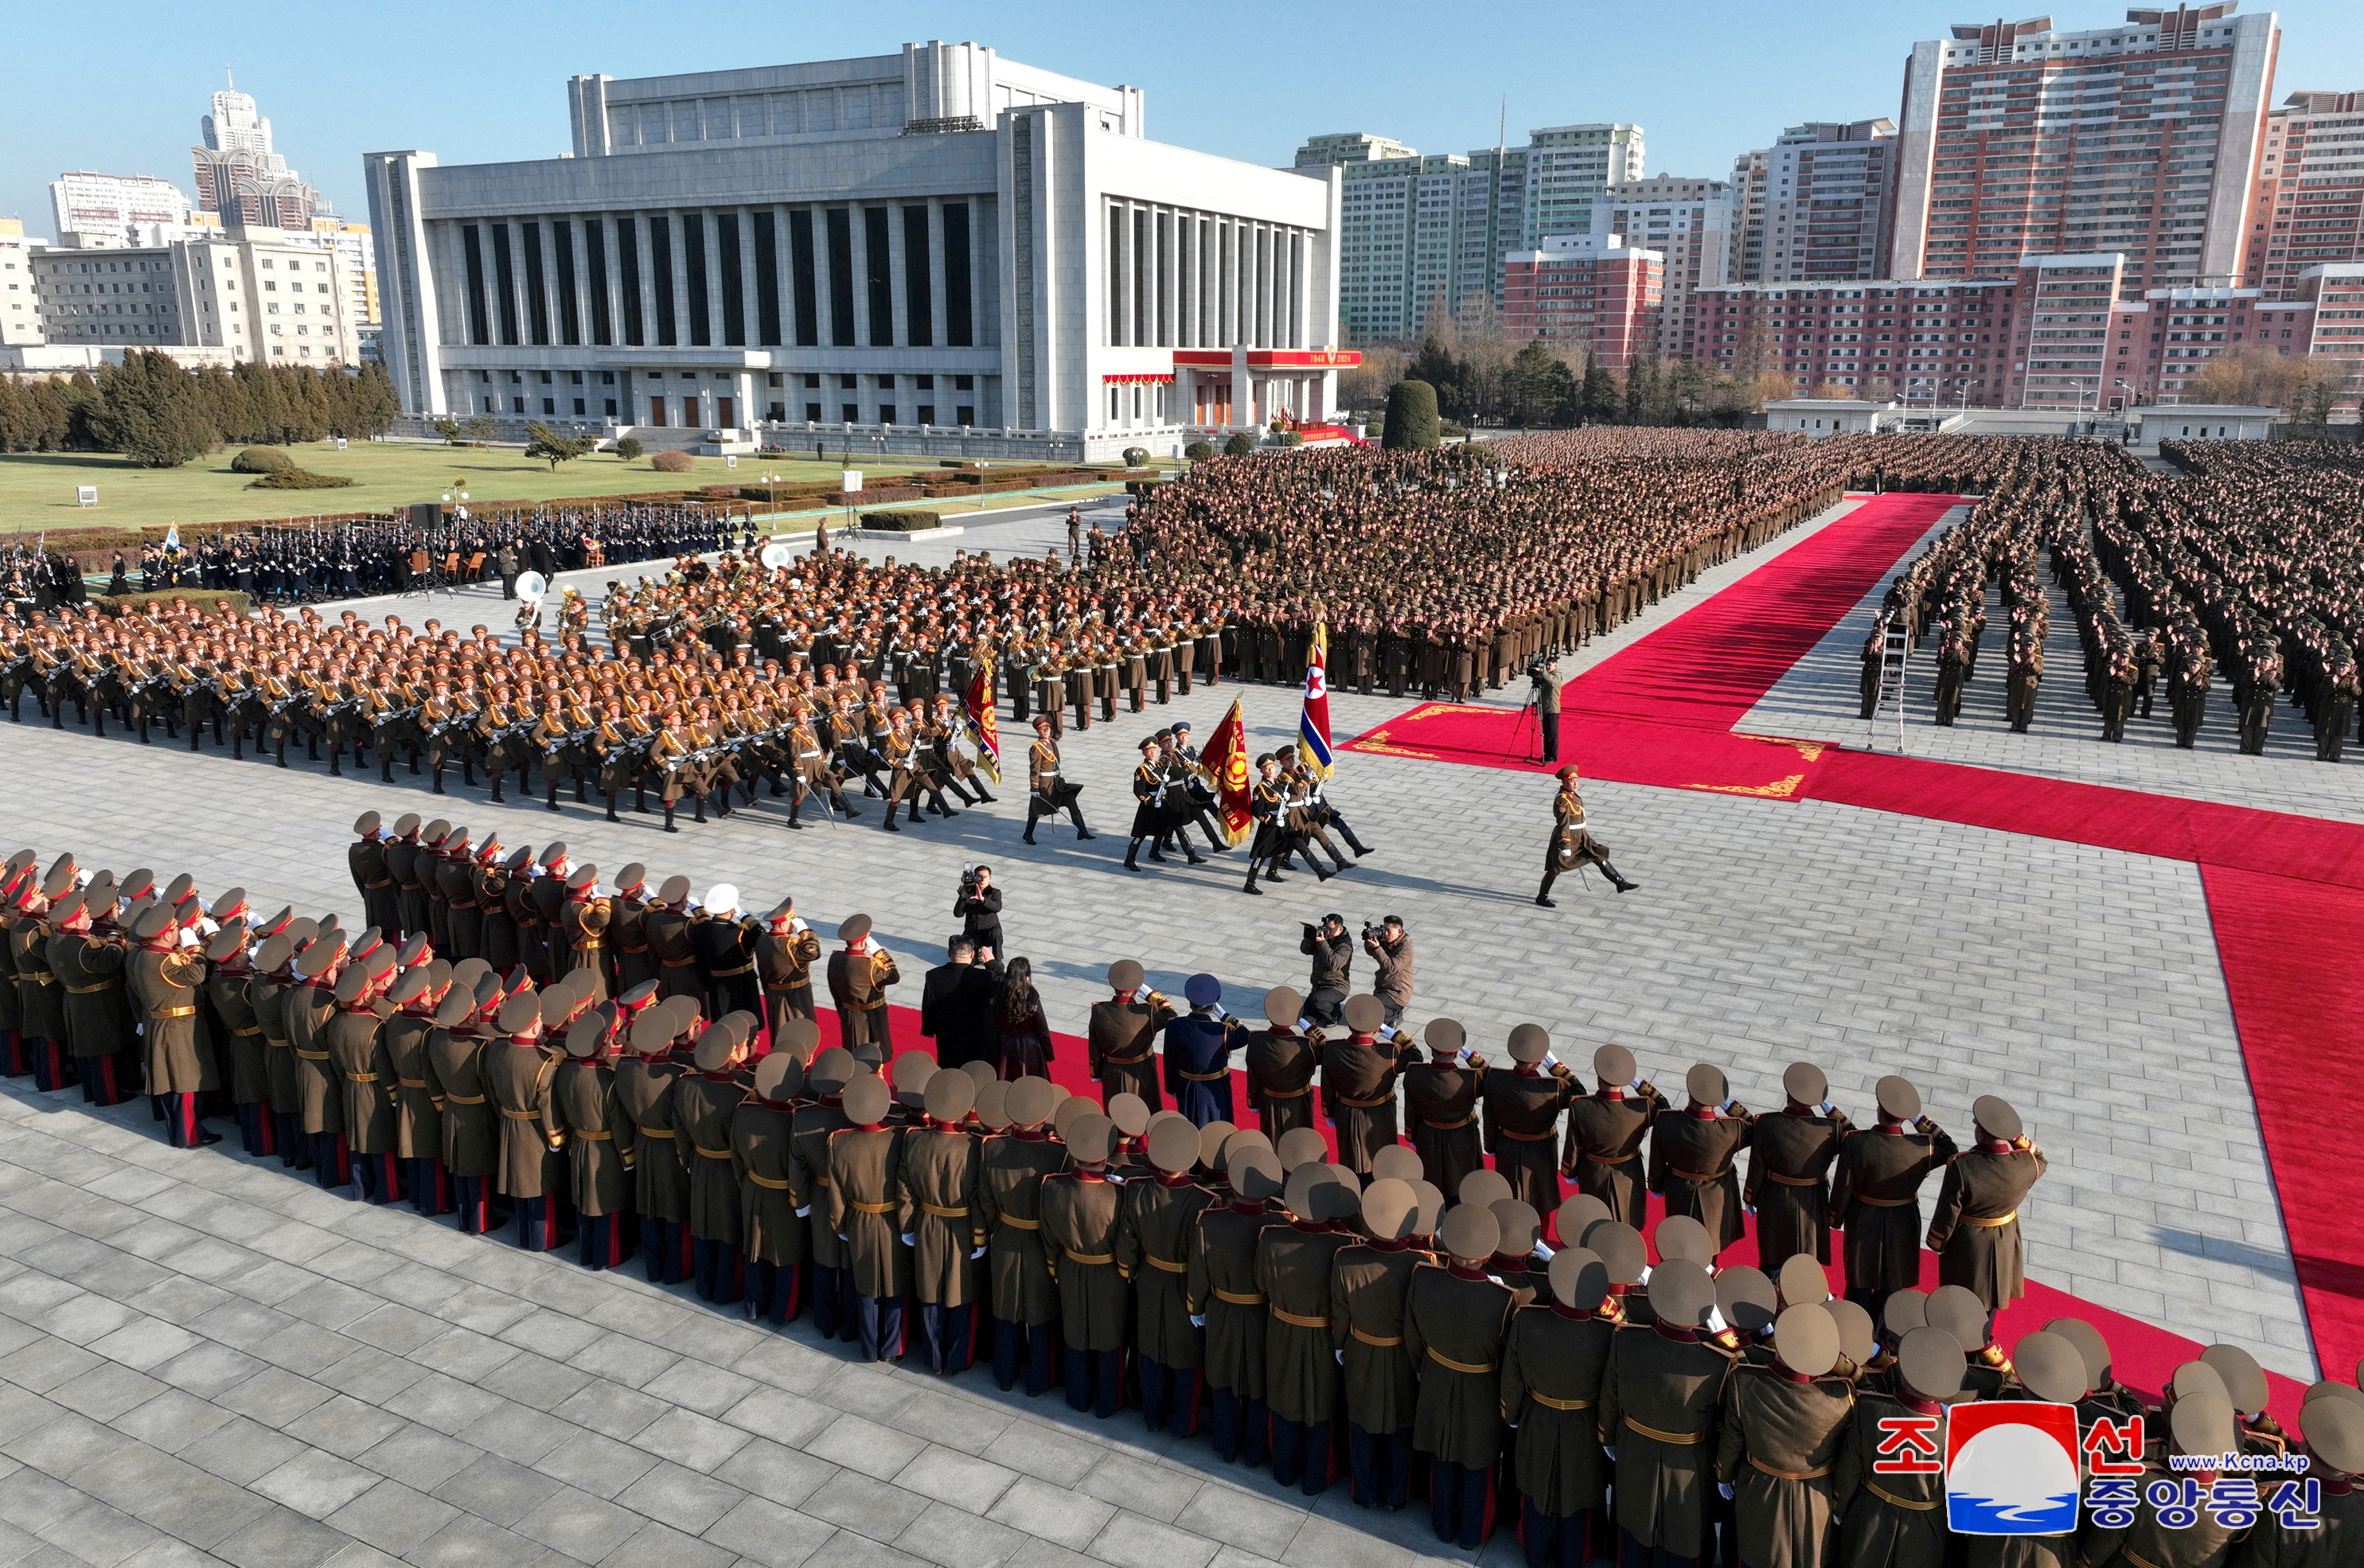 76th anniversary of the founding of the Korean People's Army